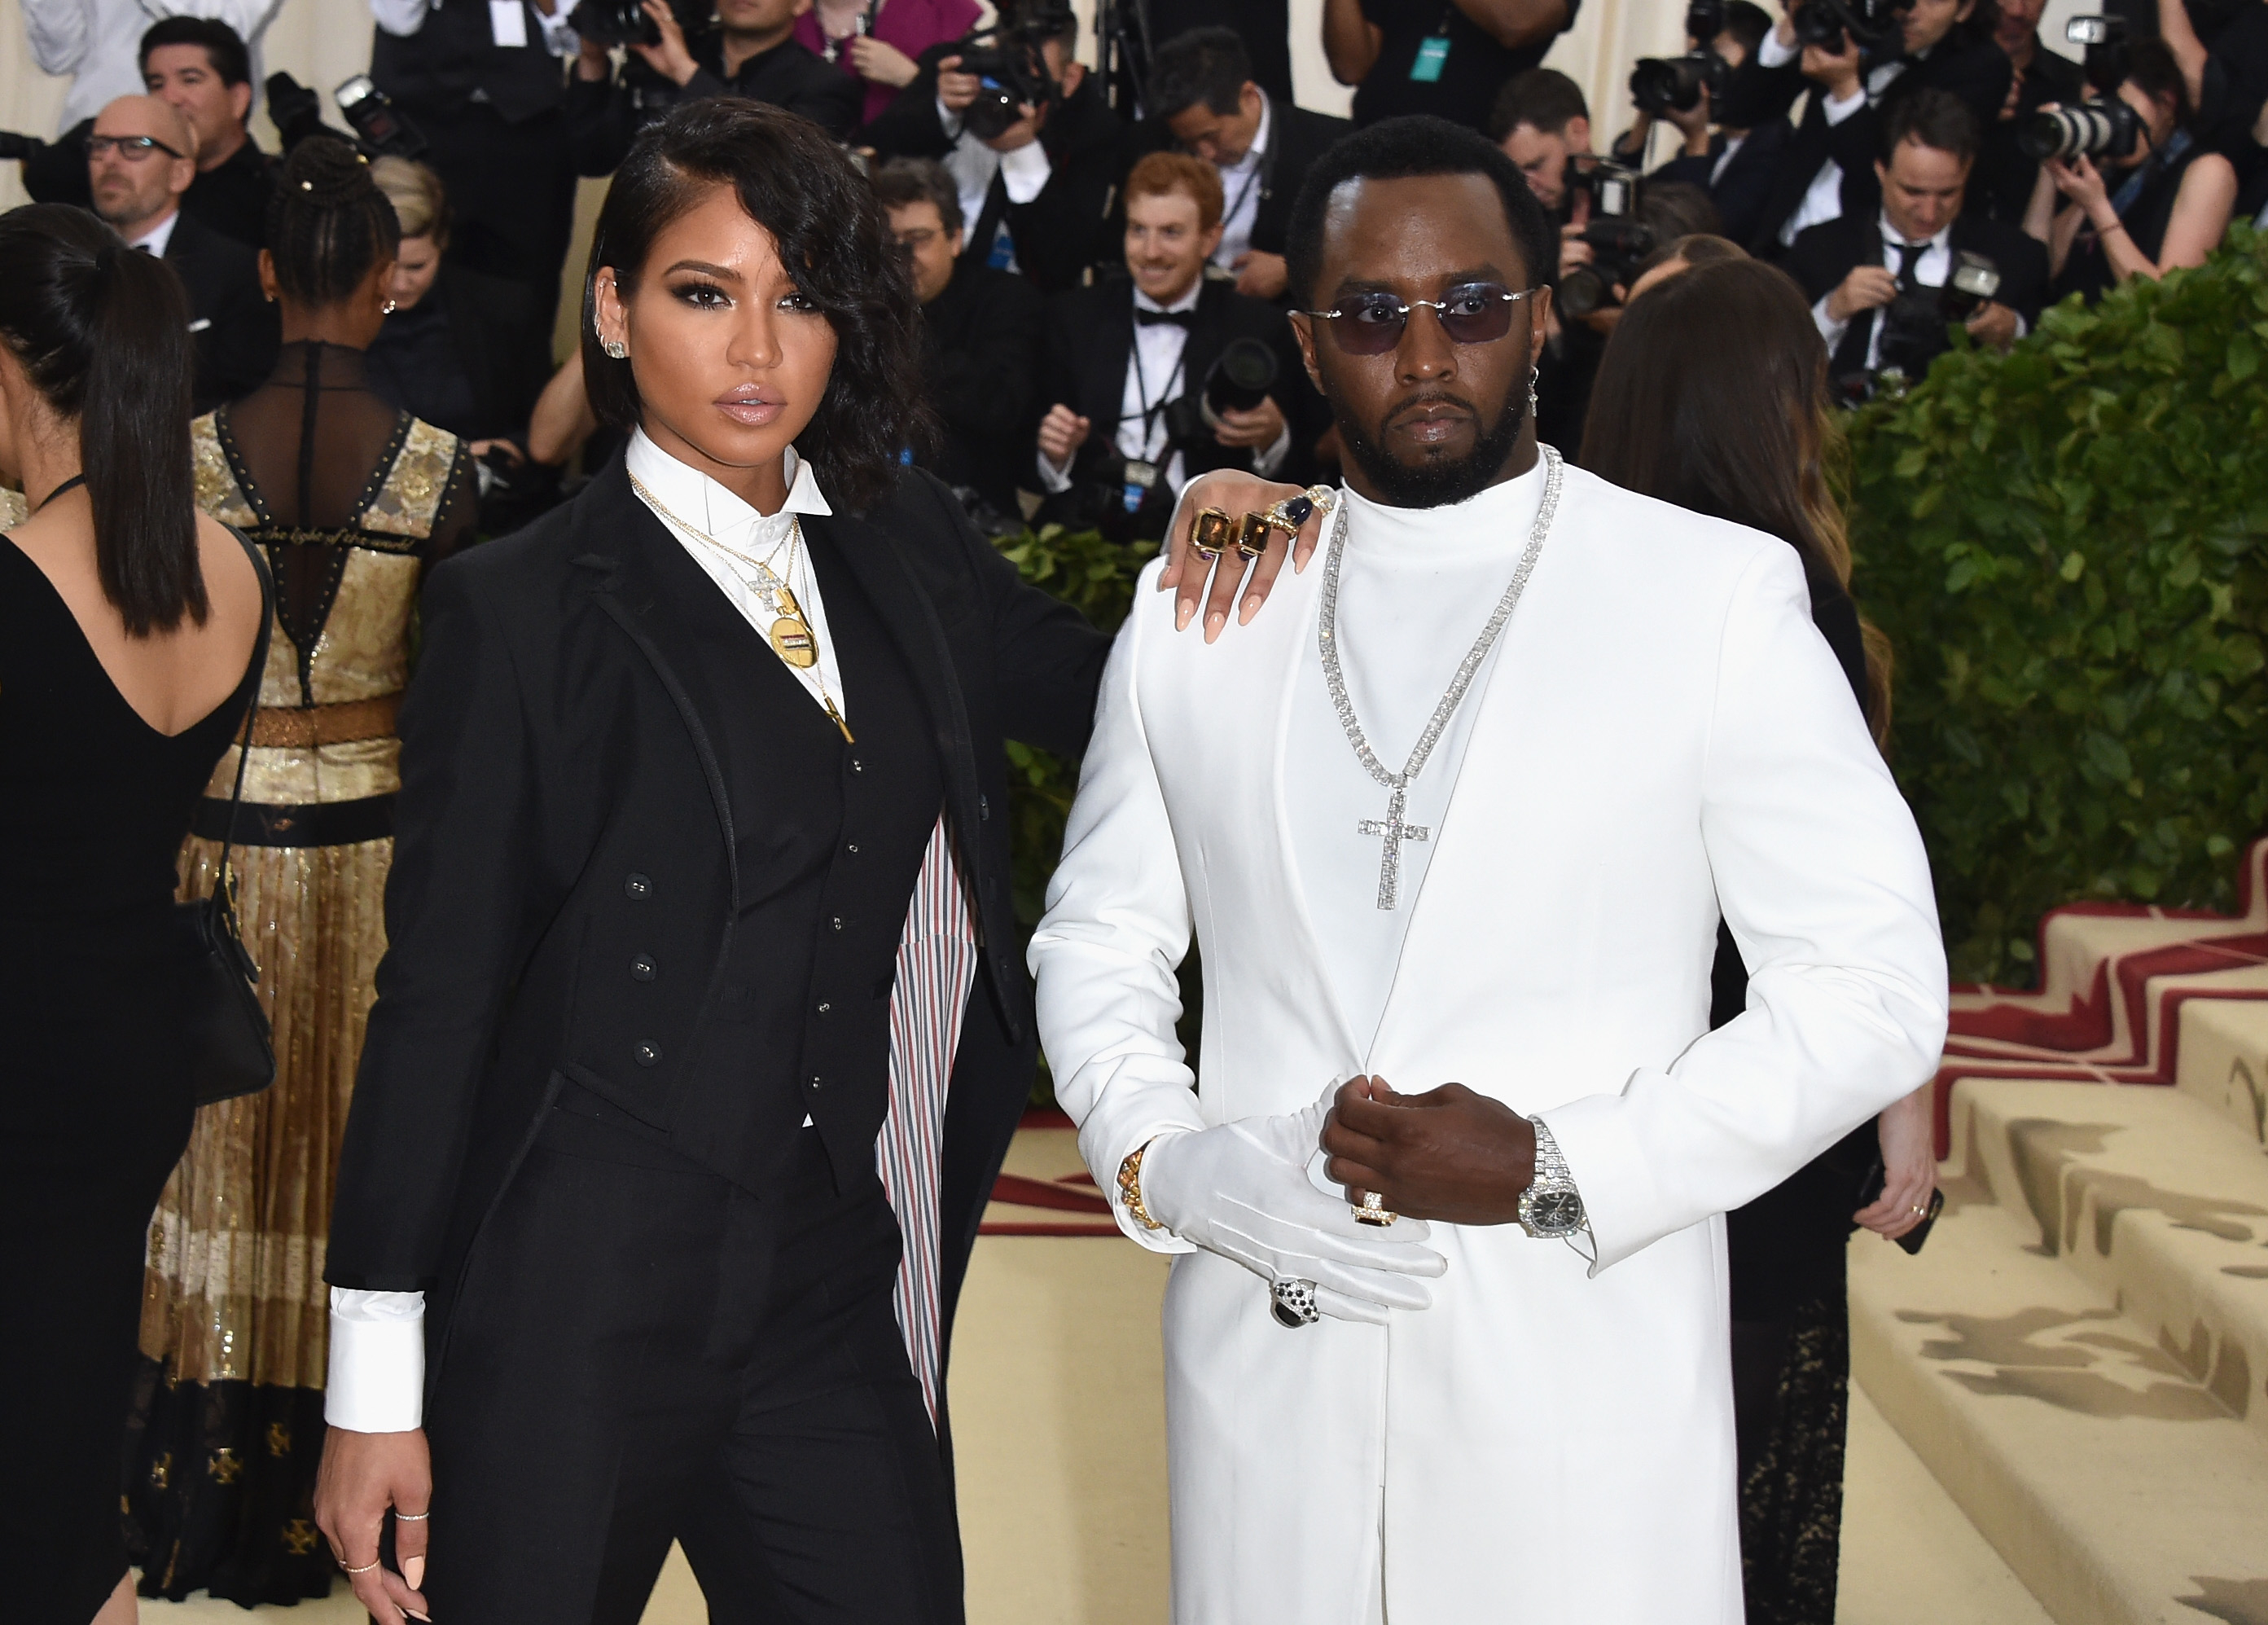 Two stylish individuals posing at an event, one in a white suit and the other in a dark ensemble with unique accessories